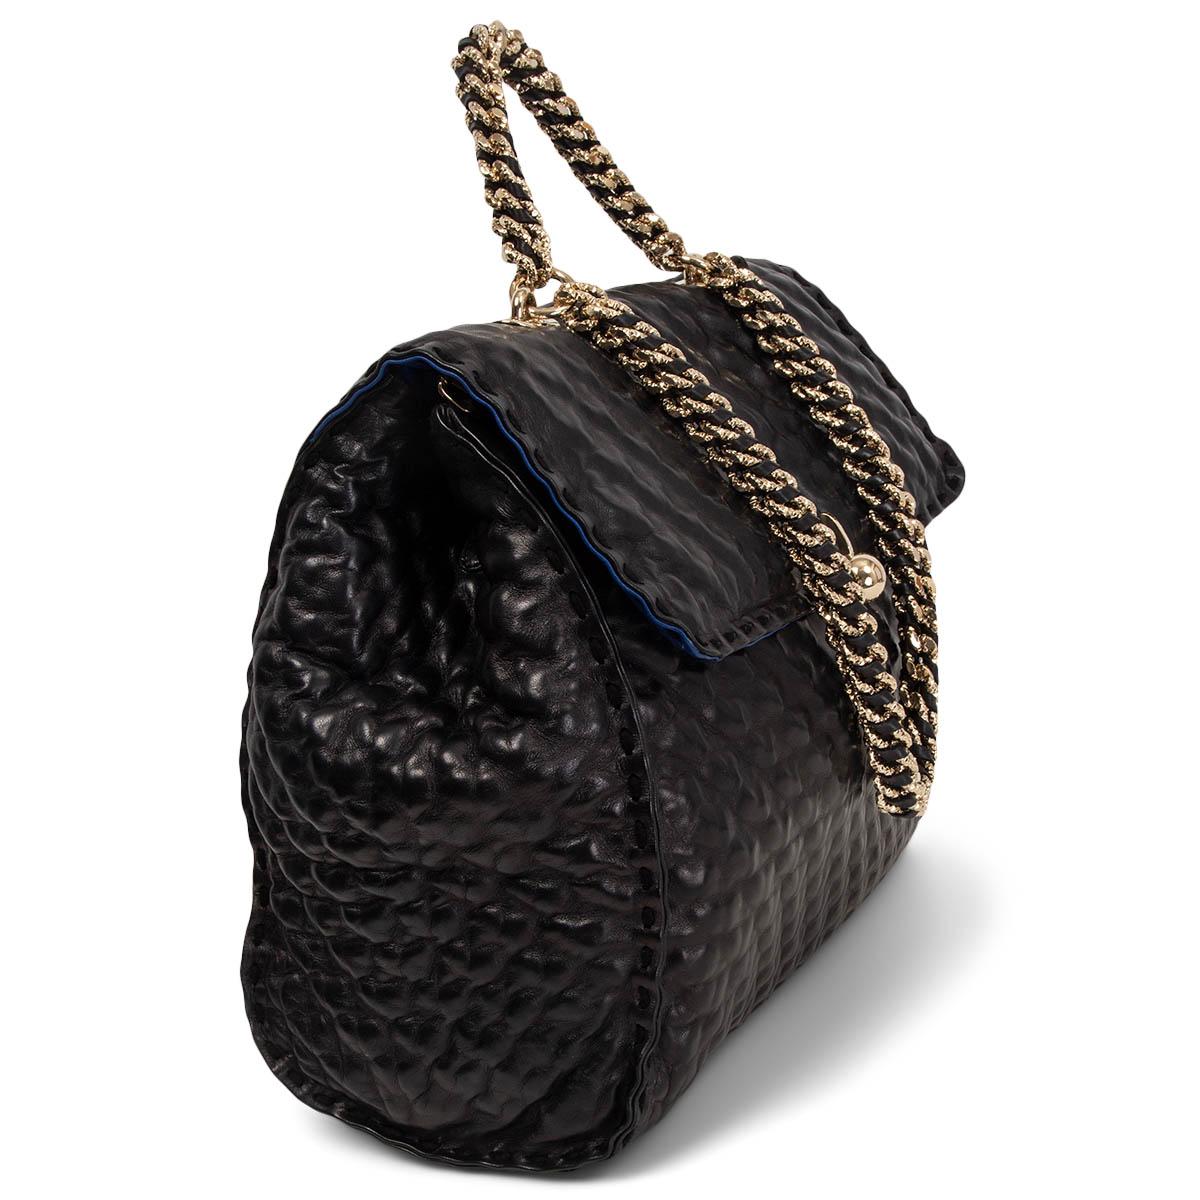 100% authentic Ermanno Scervino Faubourg Large Shoulder Bag in smooth black nappa leather and light gold-tone metal chain weaved with leather handle and strap. Opens with a flap to a specious interior lined in black knitted wool one blue nappa